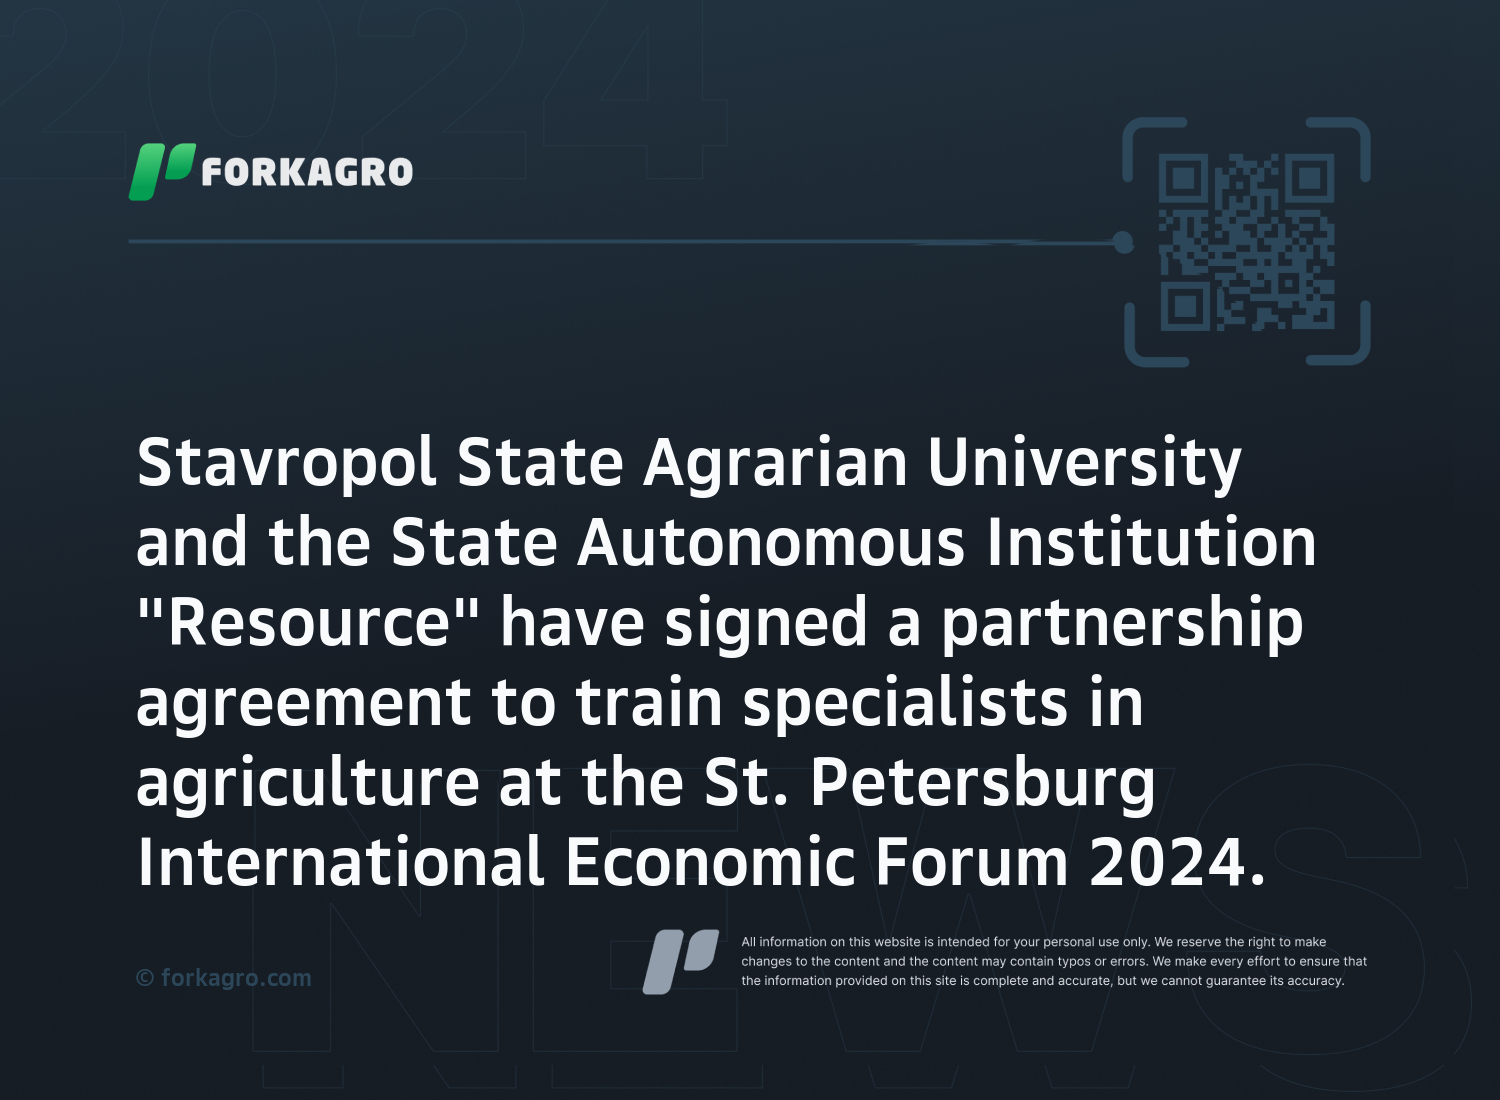 Stavropol State Agrarian University and the State Autonomous Institution "Resource" have signed a partnership agreement to train specialists in agriculture at the St. Petersburg International Economic Forum 2024.